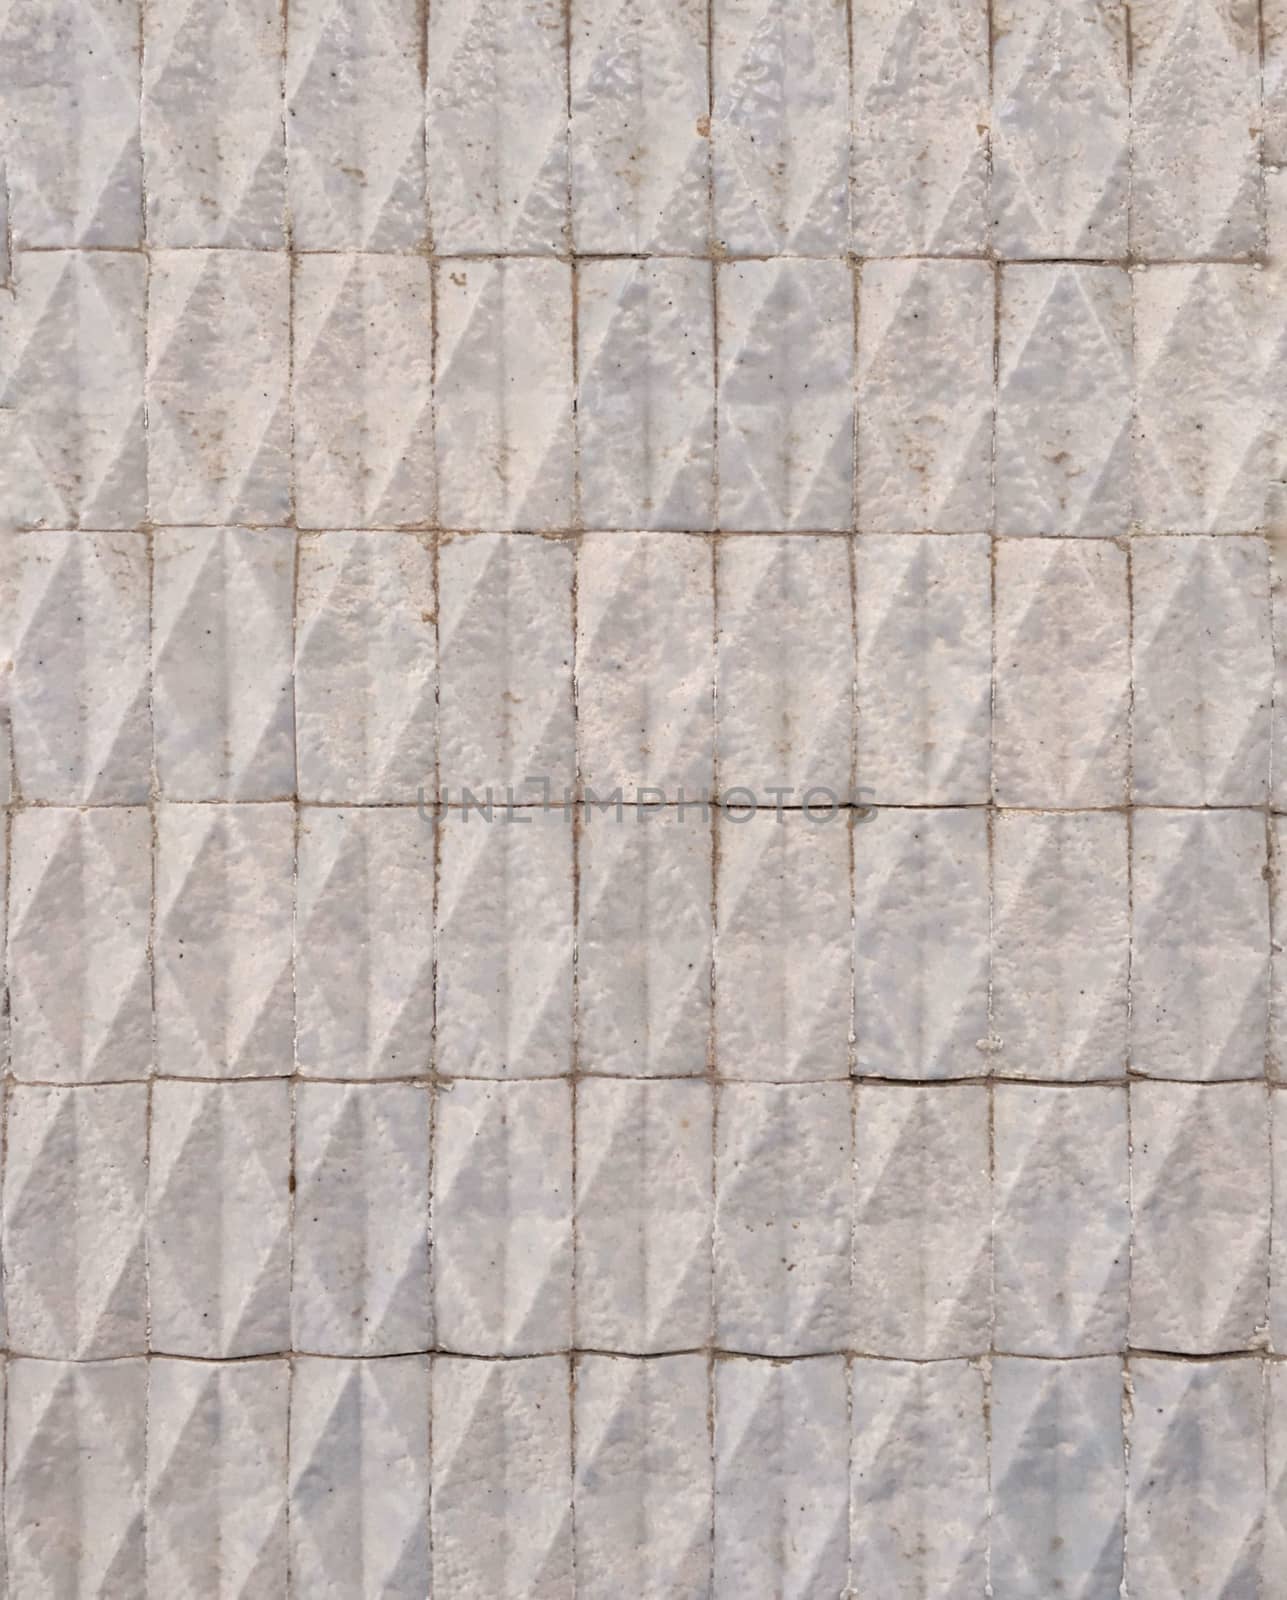 close up of a pattern made with rough tiles